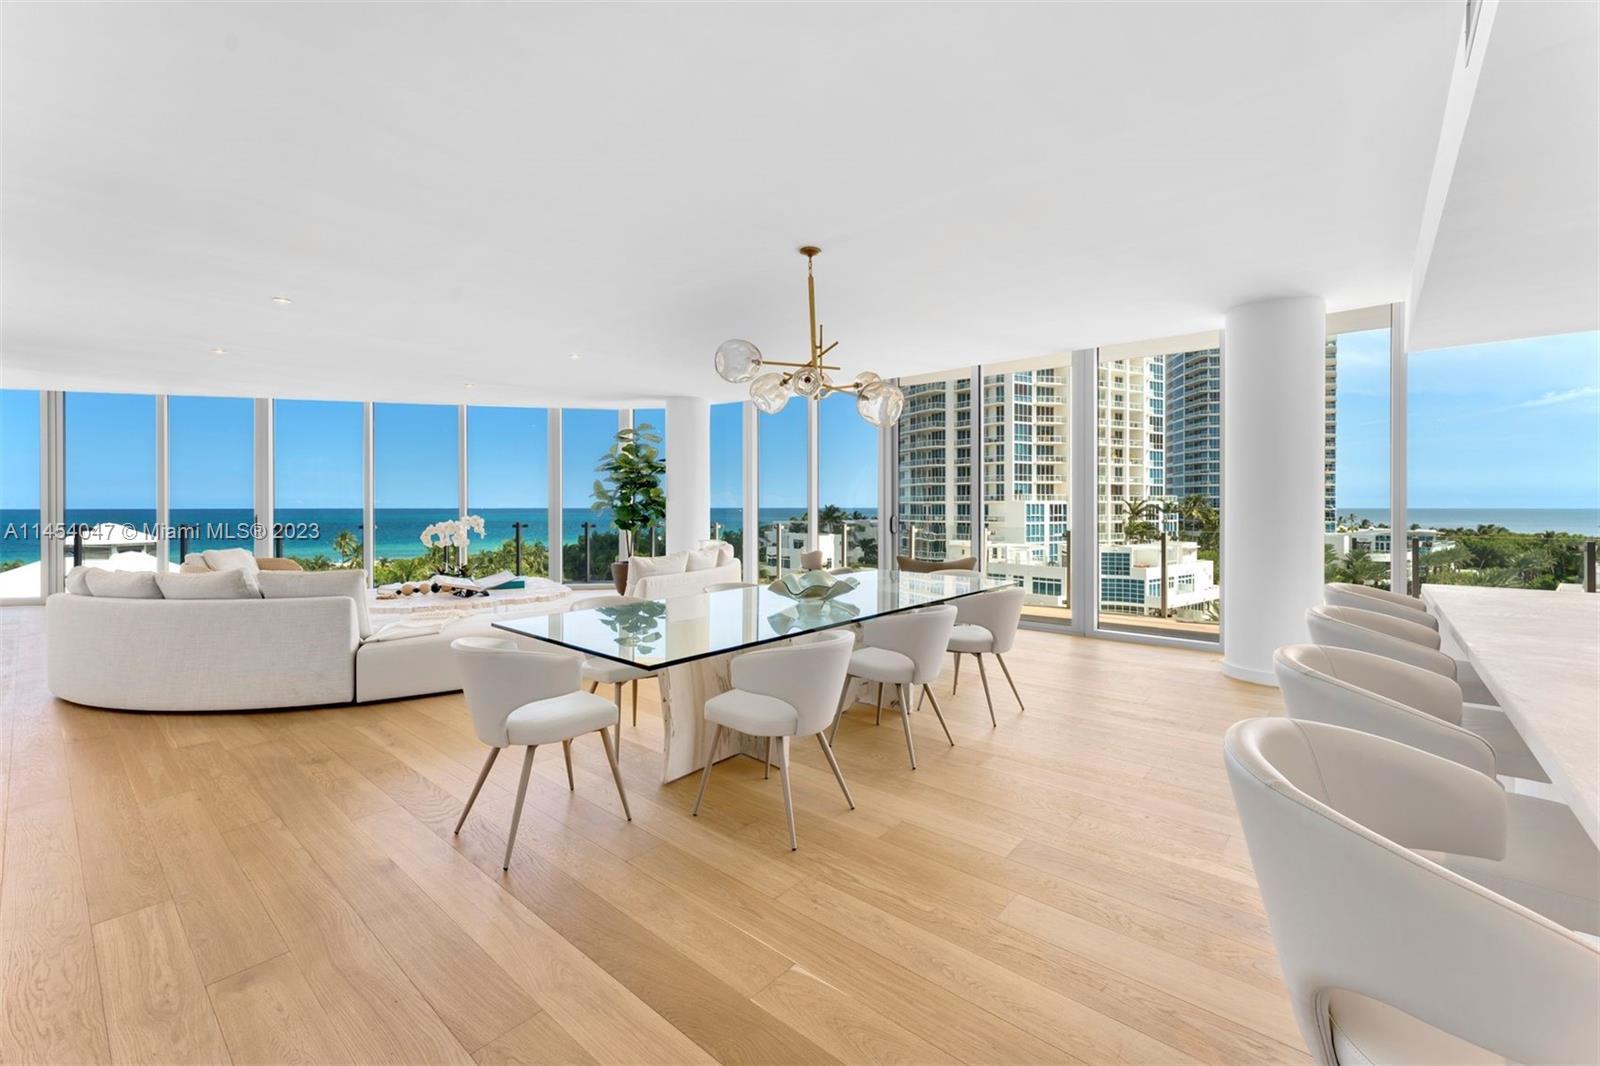 Embrace modern luxury living in this Penthouse with private rooftop at the heart of South-of-Fifth at One Ocean, where a waterfront lifestyle meets the vibrancy of the city. Blending form & function, this 3,339 sq. ft. penthouse is nestled in a prime location with unobstructed ocean views, showcasing South Beach’s coastal charm. This open-concept residence boasts its own rooftop oasis with sunrise to sunset views, wraparound balcony, floor-to-ceiling windows, & private elevator entrance, setting the stage for a lifestyle of comfort & entertainment. Exquisitely finished, the kitchen exhibits marble countertops, wooden cabinetry, Wolf appliances & wine cooler. Enjoy resort-style amenities steps away from the famous fine dining & shopping of South Beach.